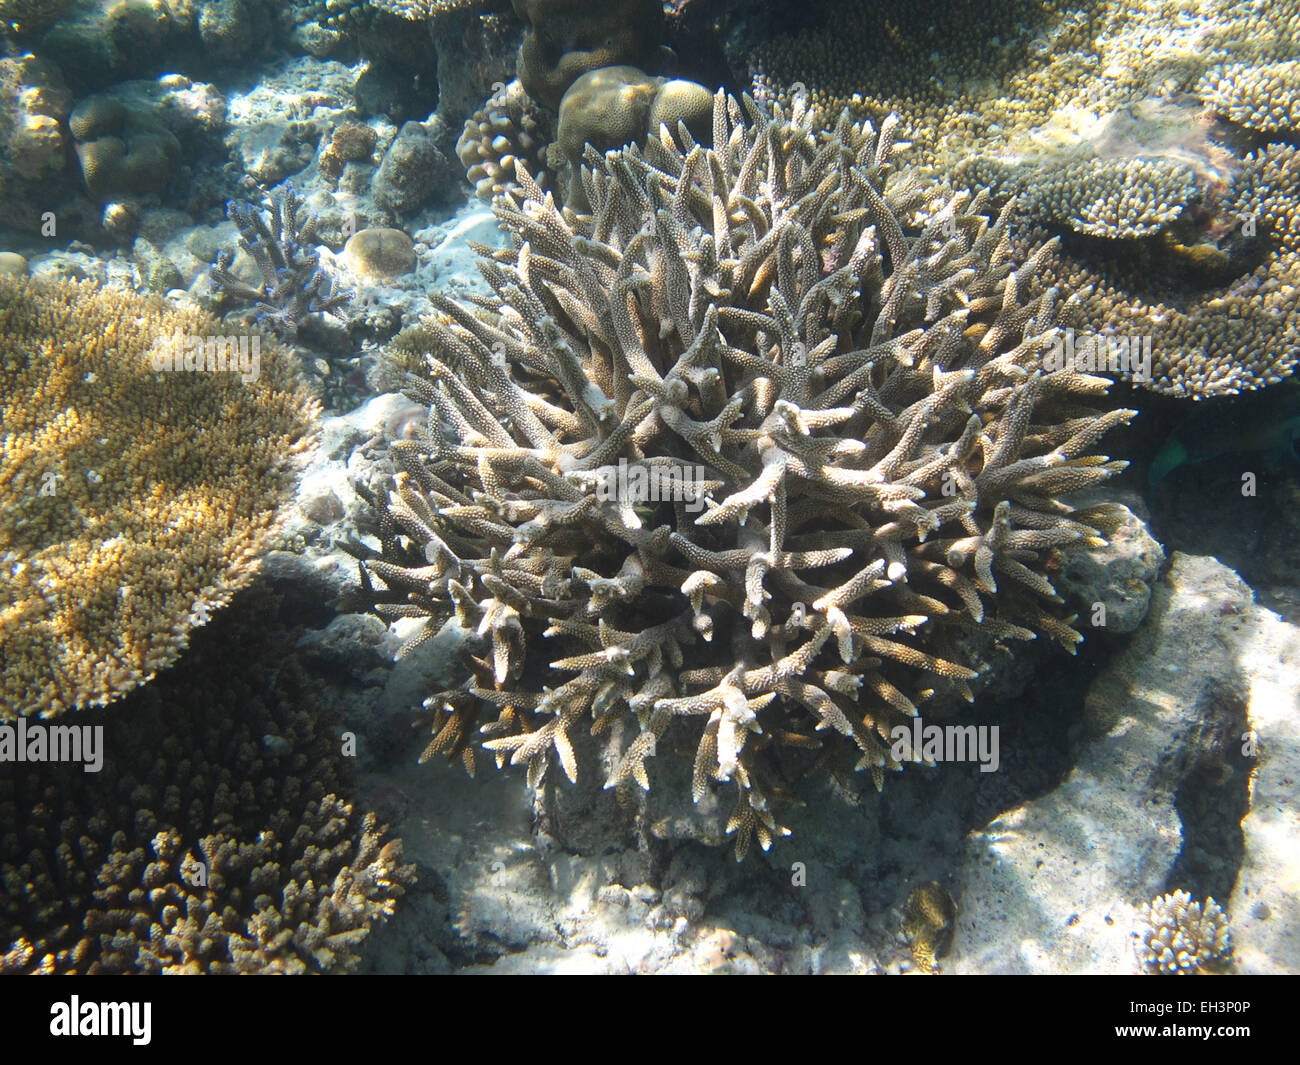 Staghorn and other corals on a reef in the Maldives Stock Photo